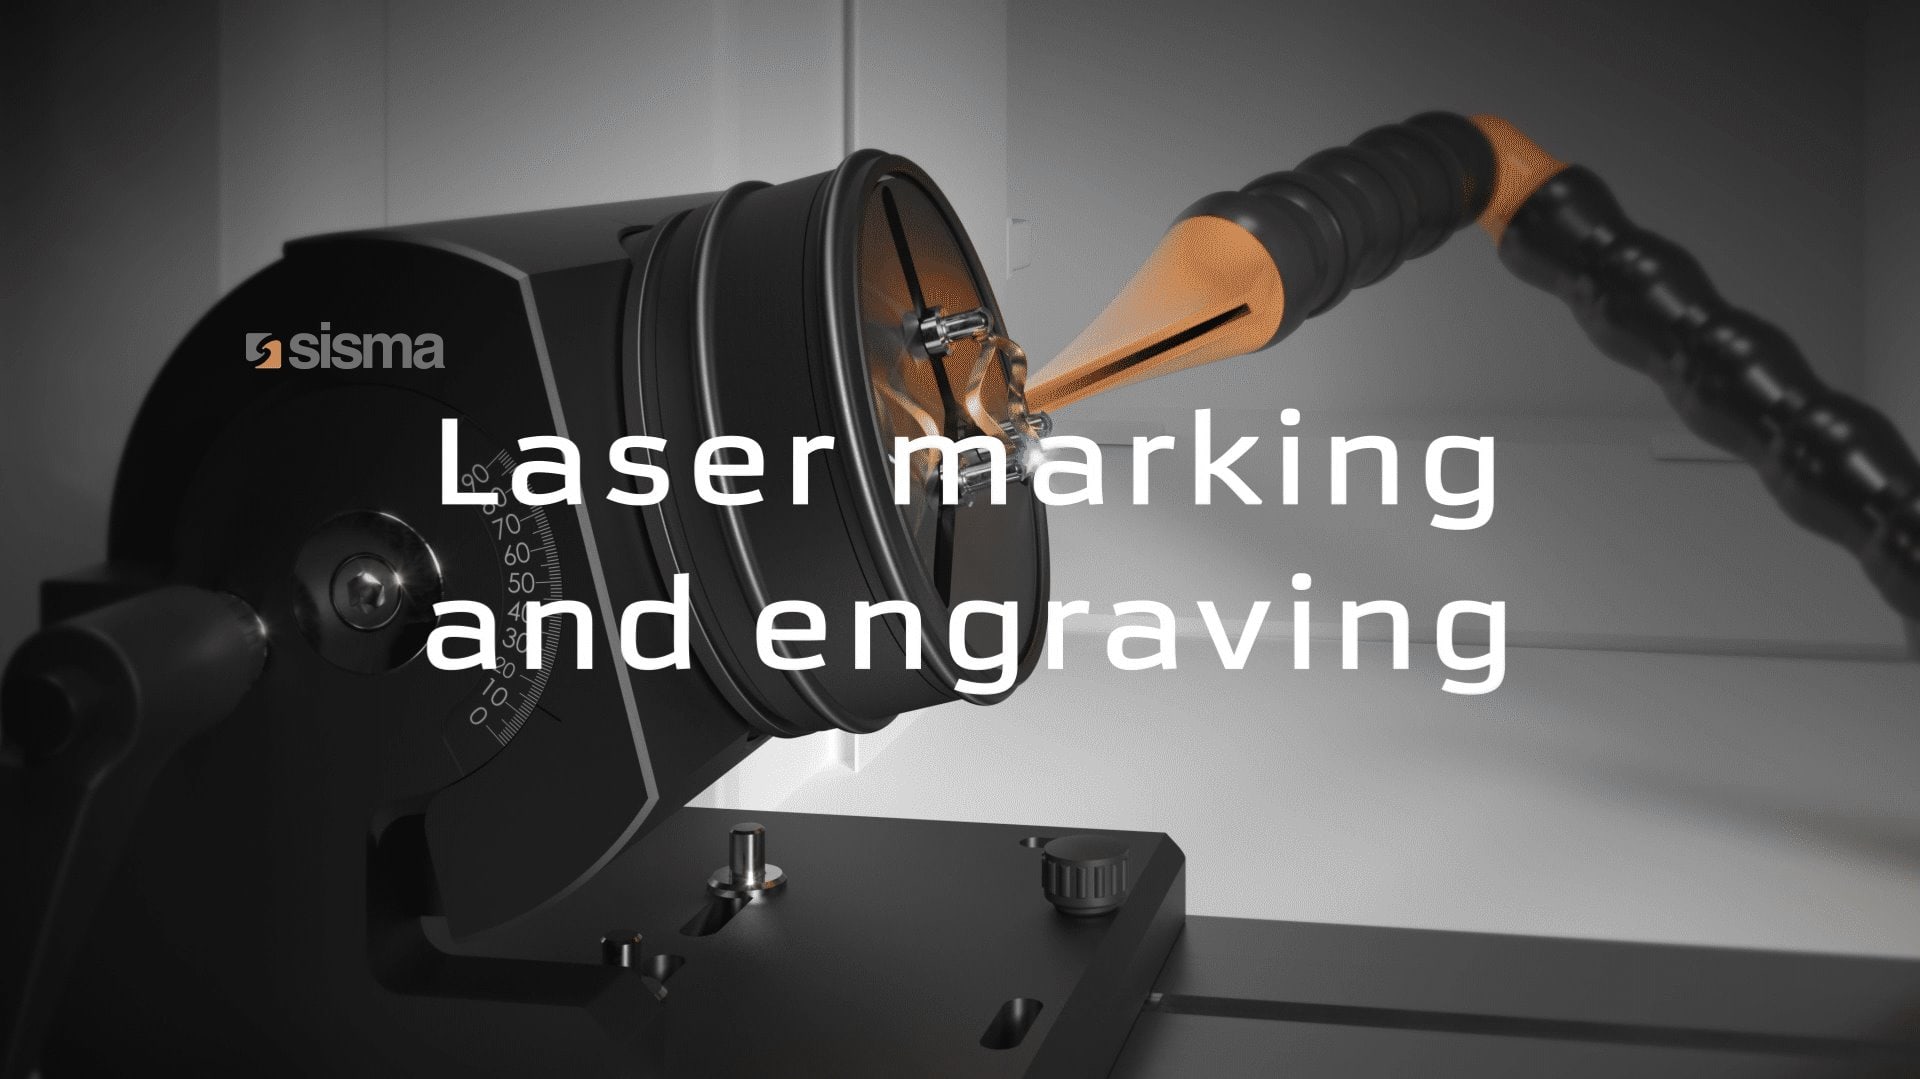 Laser marking and engraving Systems from Sisma